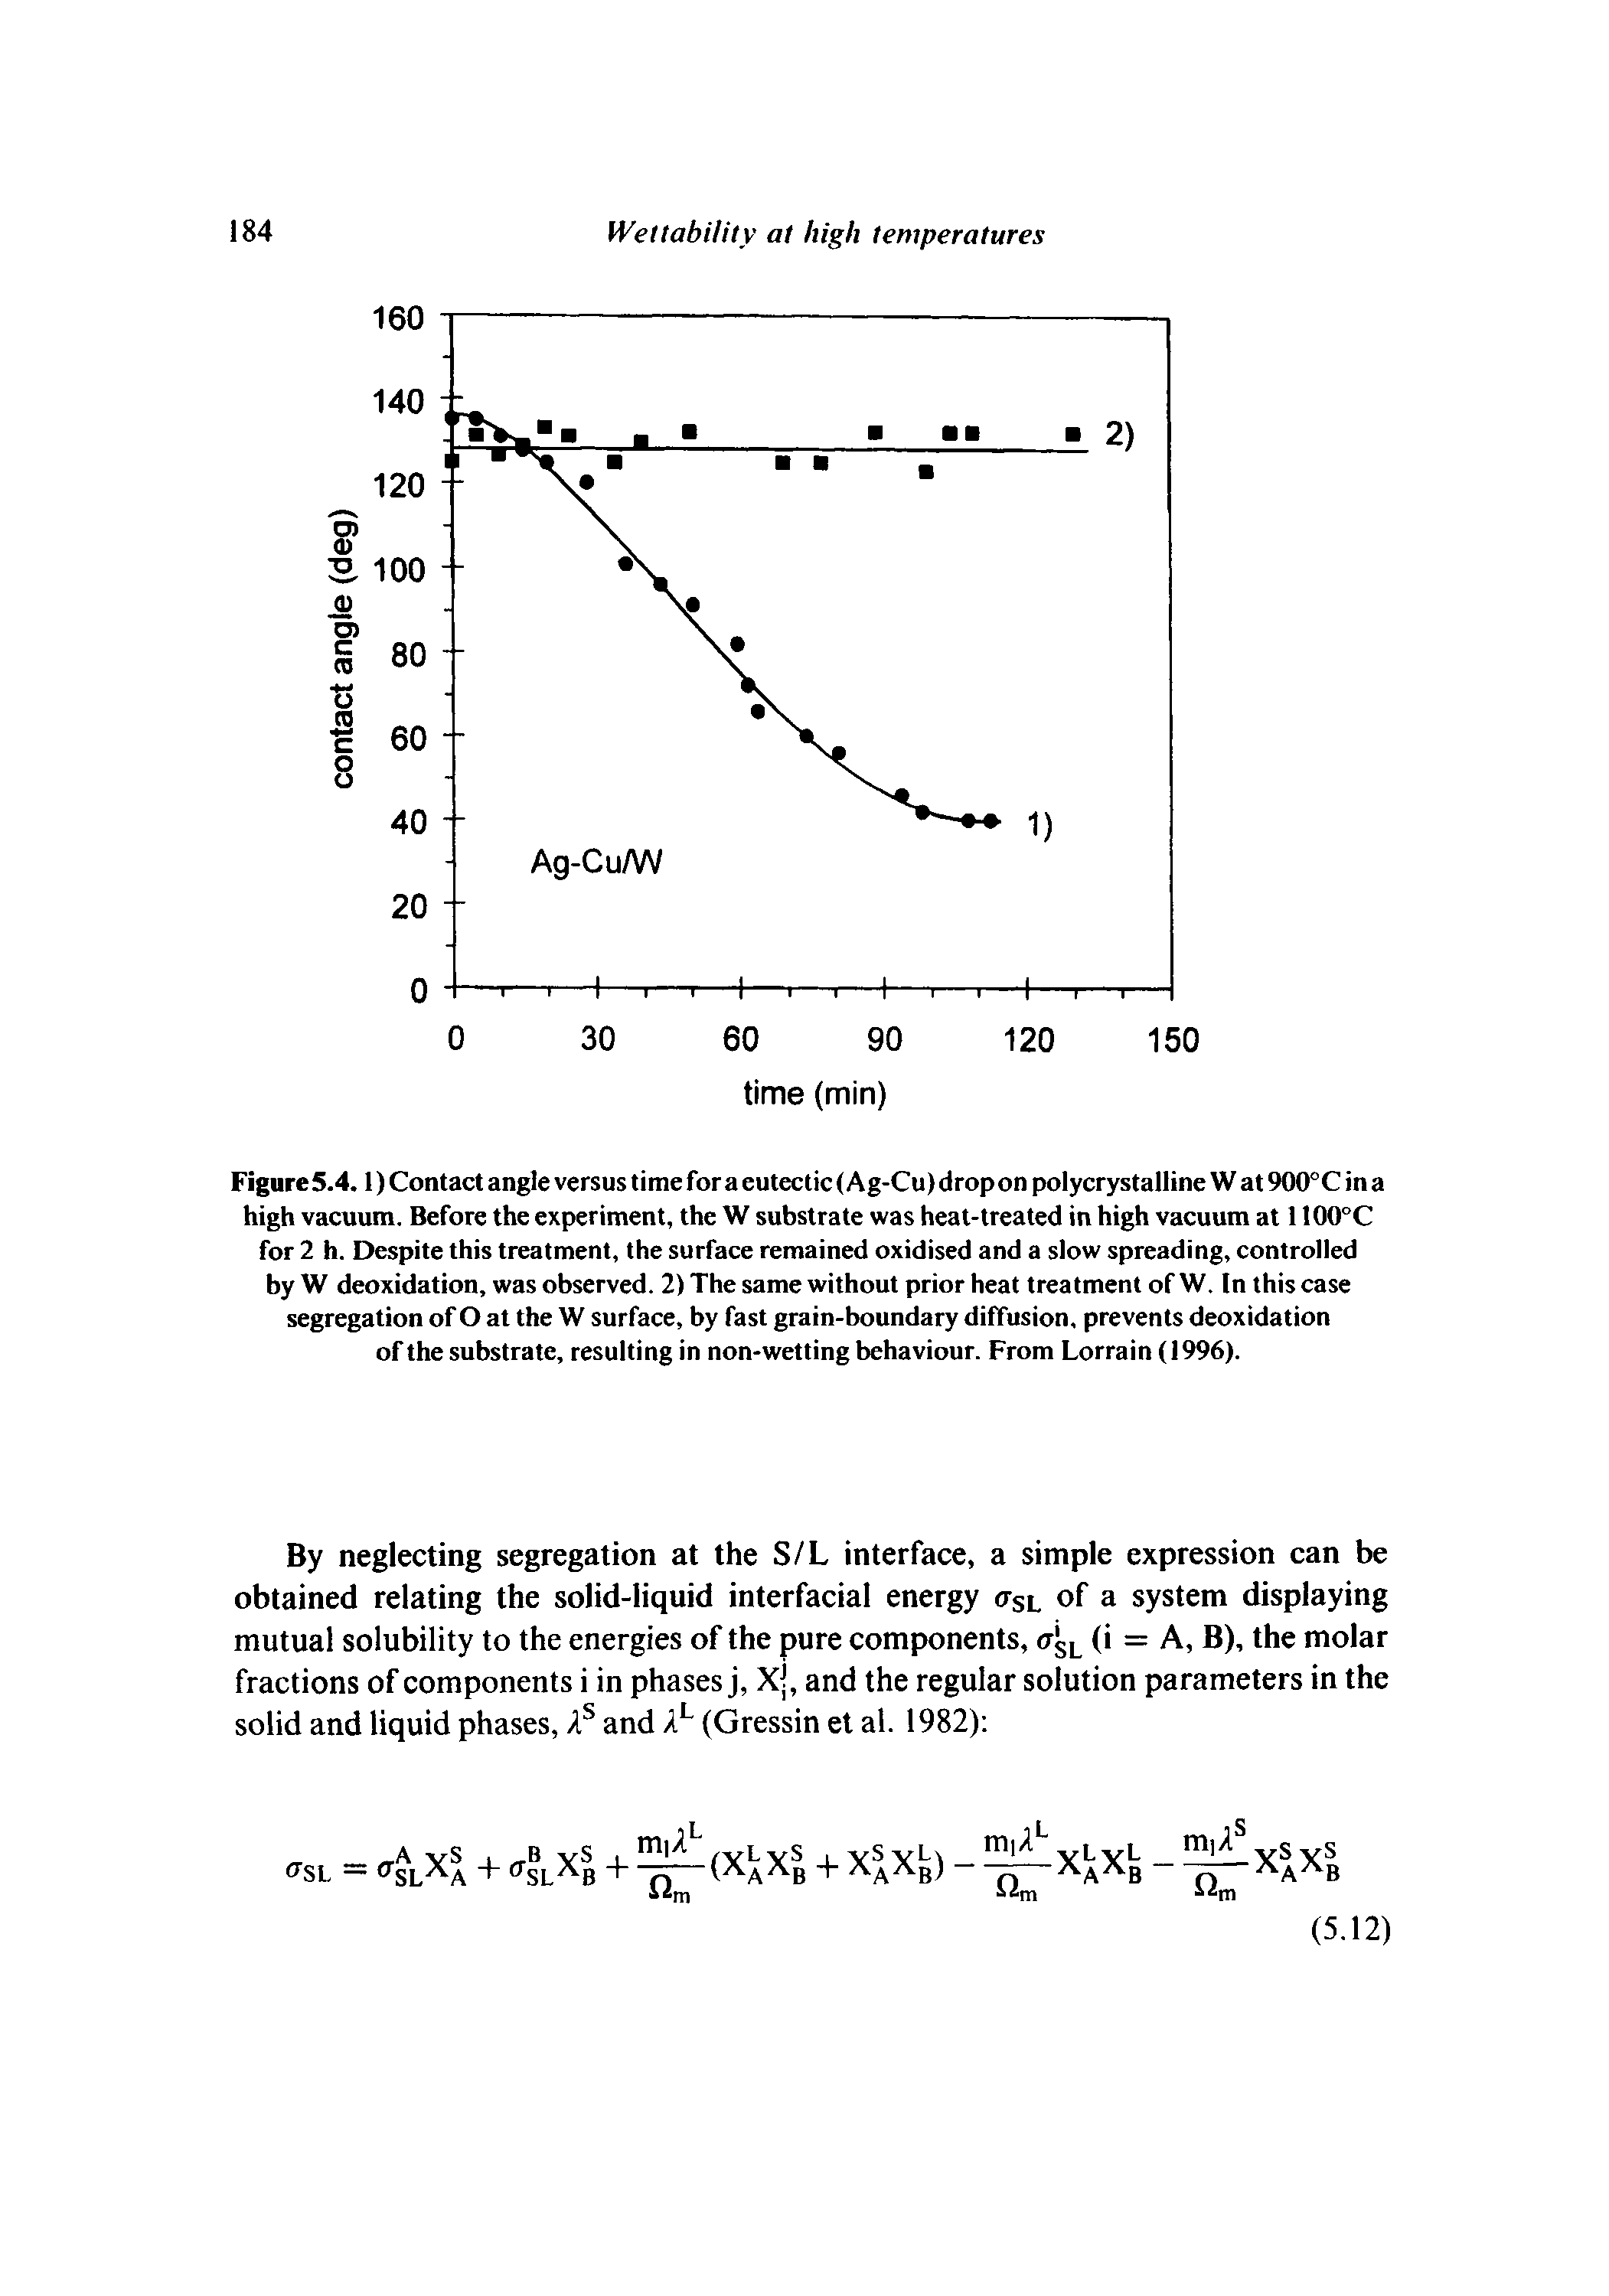 Figure5.4.1) Contact angle versus time for a eutectic (Ag-Cu) dropon polycrystalline W at 900°C in a high vacuum. Before the experiment, the W substrate was heat-treated in high vacuum at 1100°C for 2 h. Despite this treatment, the surface remained oxidised and a slow spreading, controlled by W deoxidation, was observed. 2) The same without prior heat treatment of W. In this case segregation of O at the W surface, by fast grain-boundary diffusion, prevents deoxidation of the substrate, resulting in non-wetting behaviour. From Lorrain (1996).